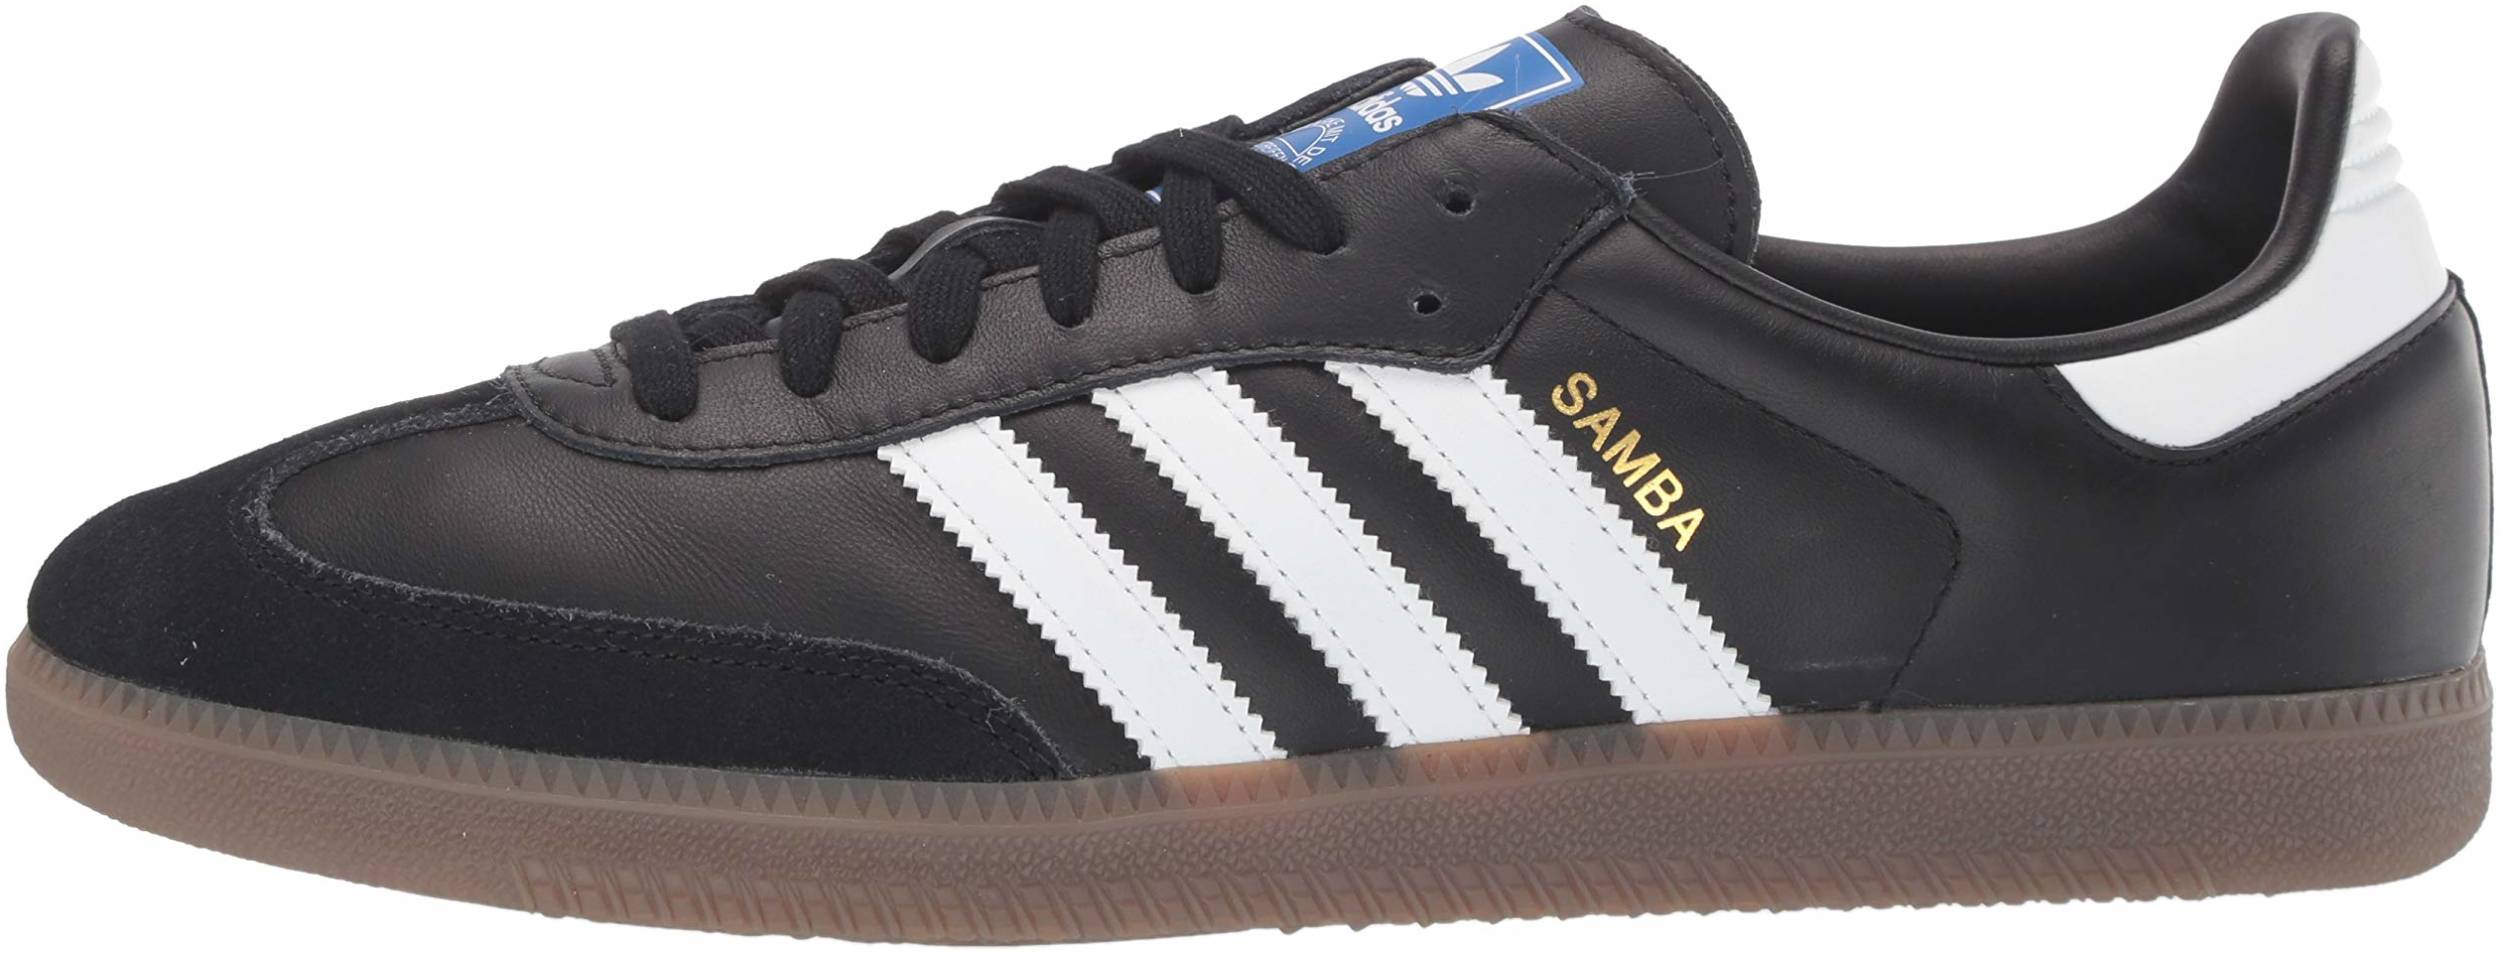 Only $53 + Review of Adidas Samba 